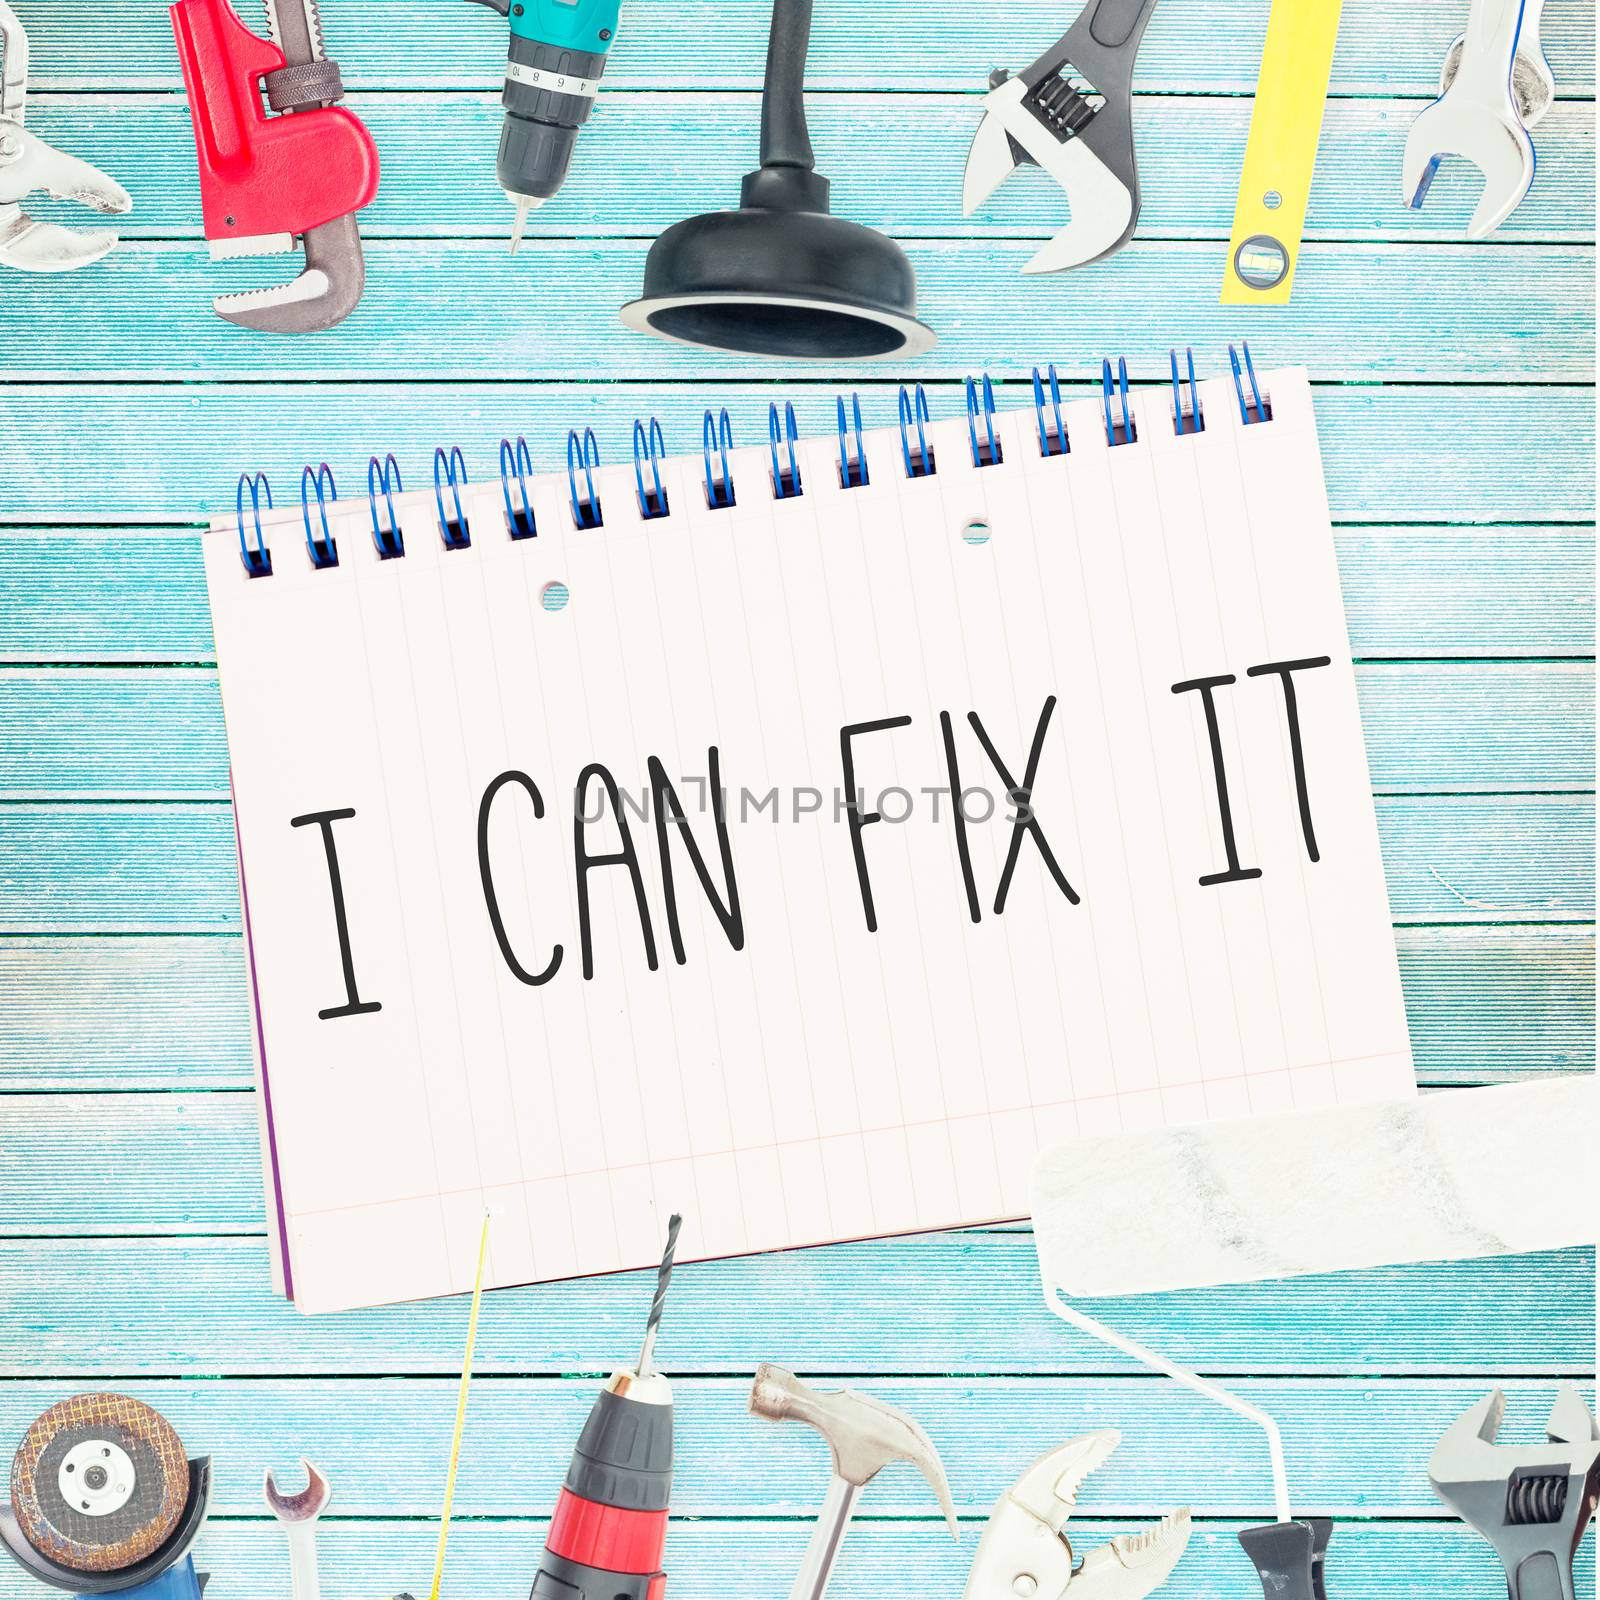 The word i can fix it against tools and notepad on wooden background